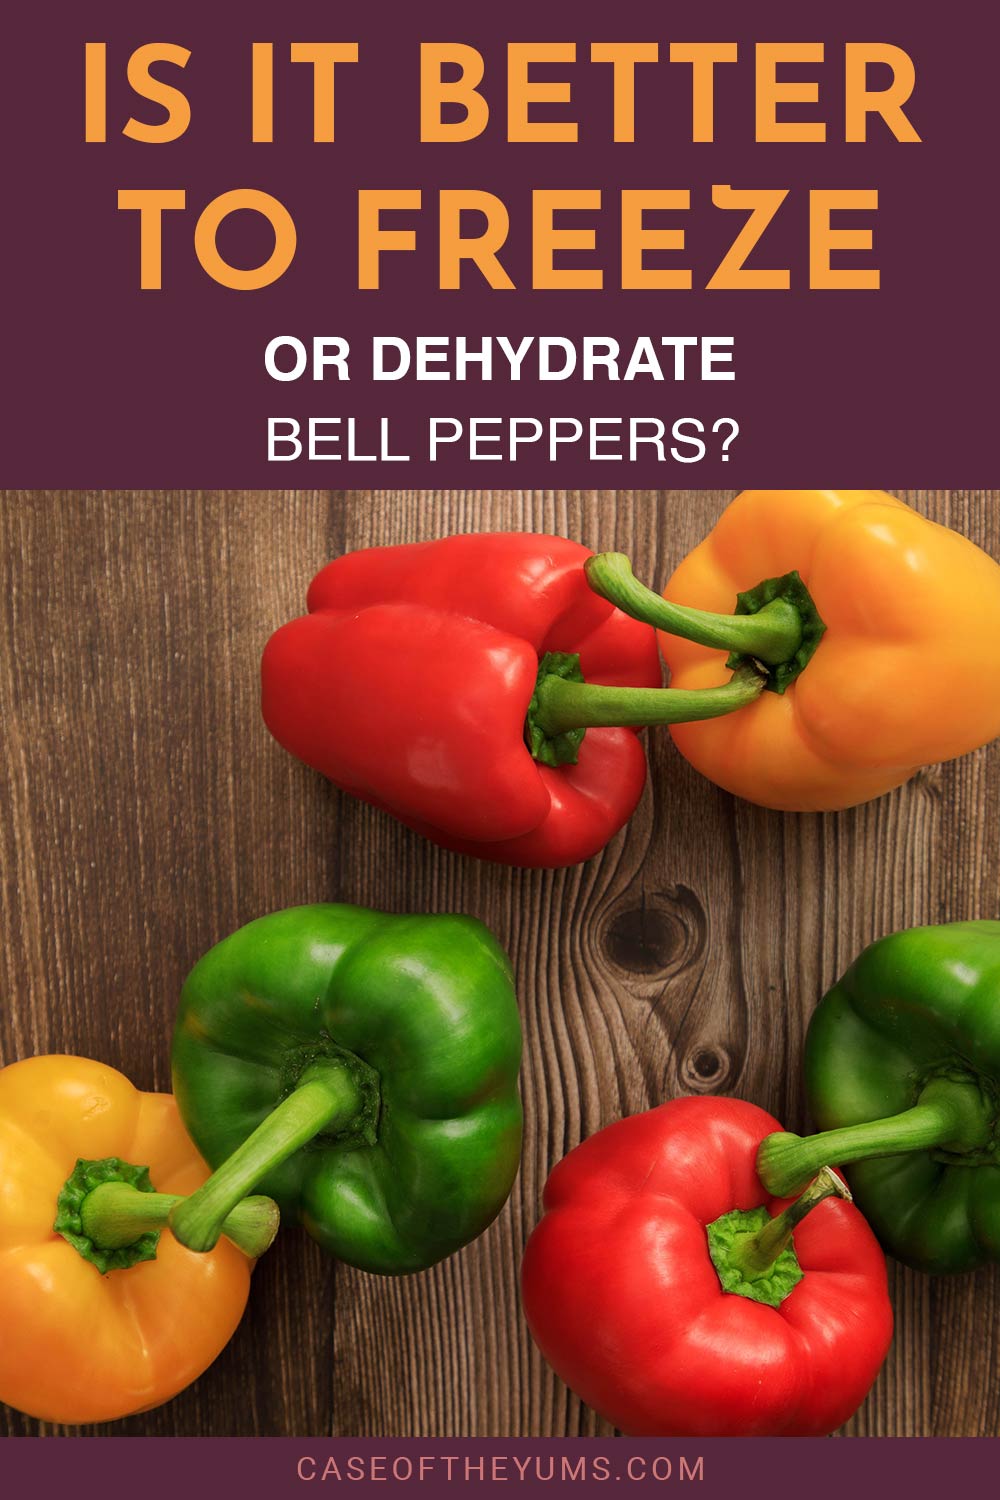 Red, green and yellow Bell Peppers on a wooden surface - Is It Better To Freeze Or Dehydrate them?